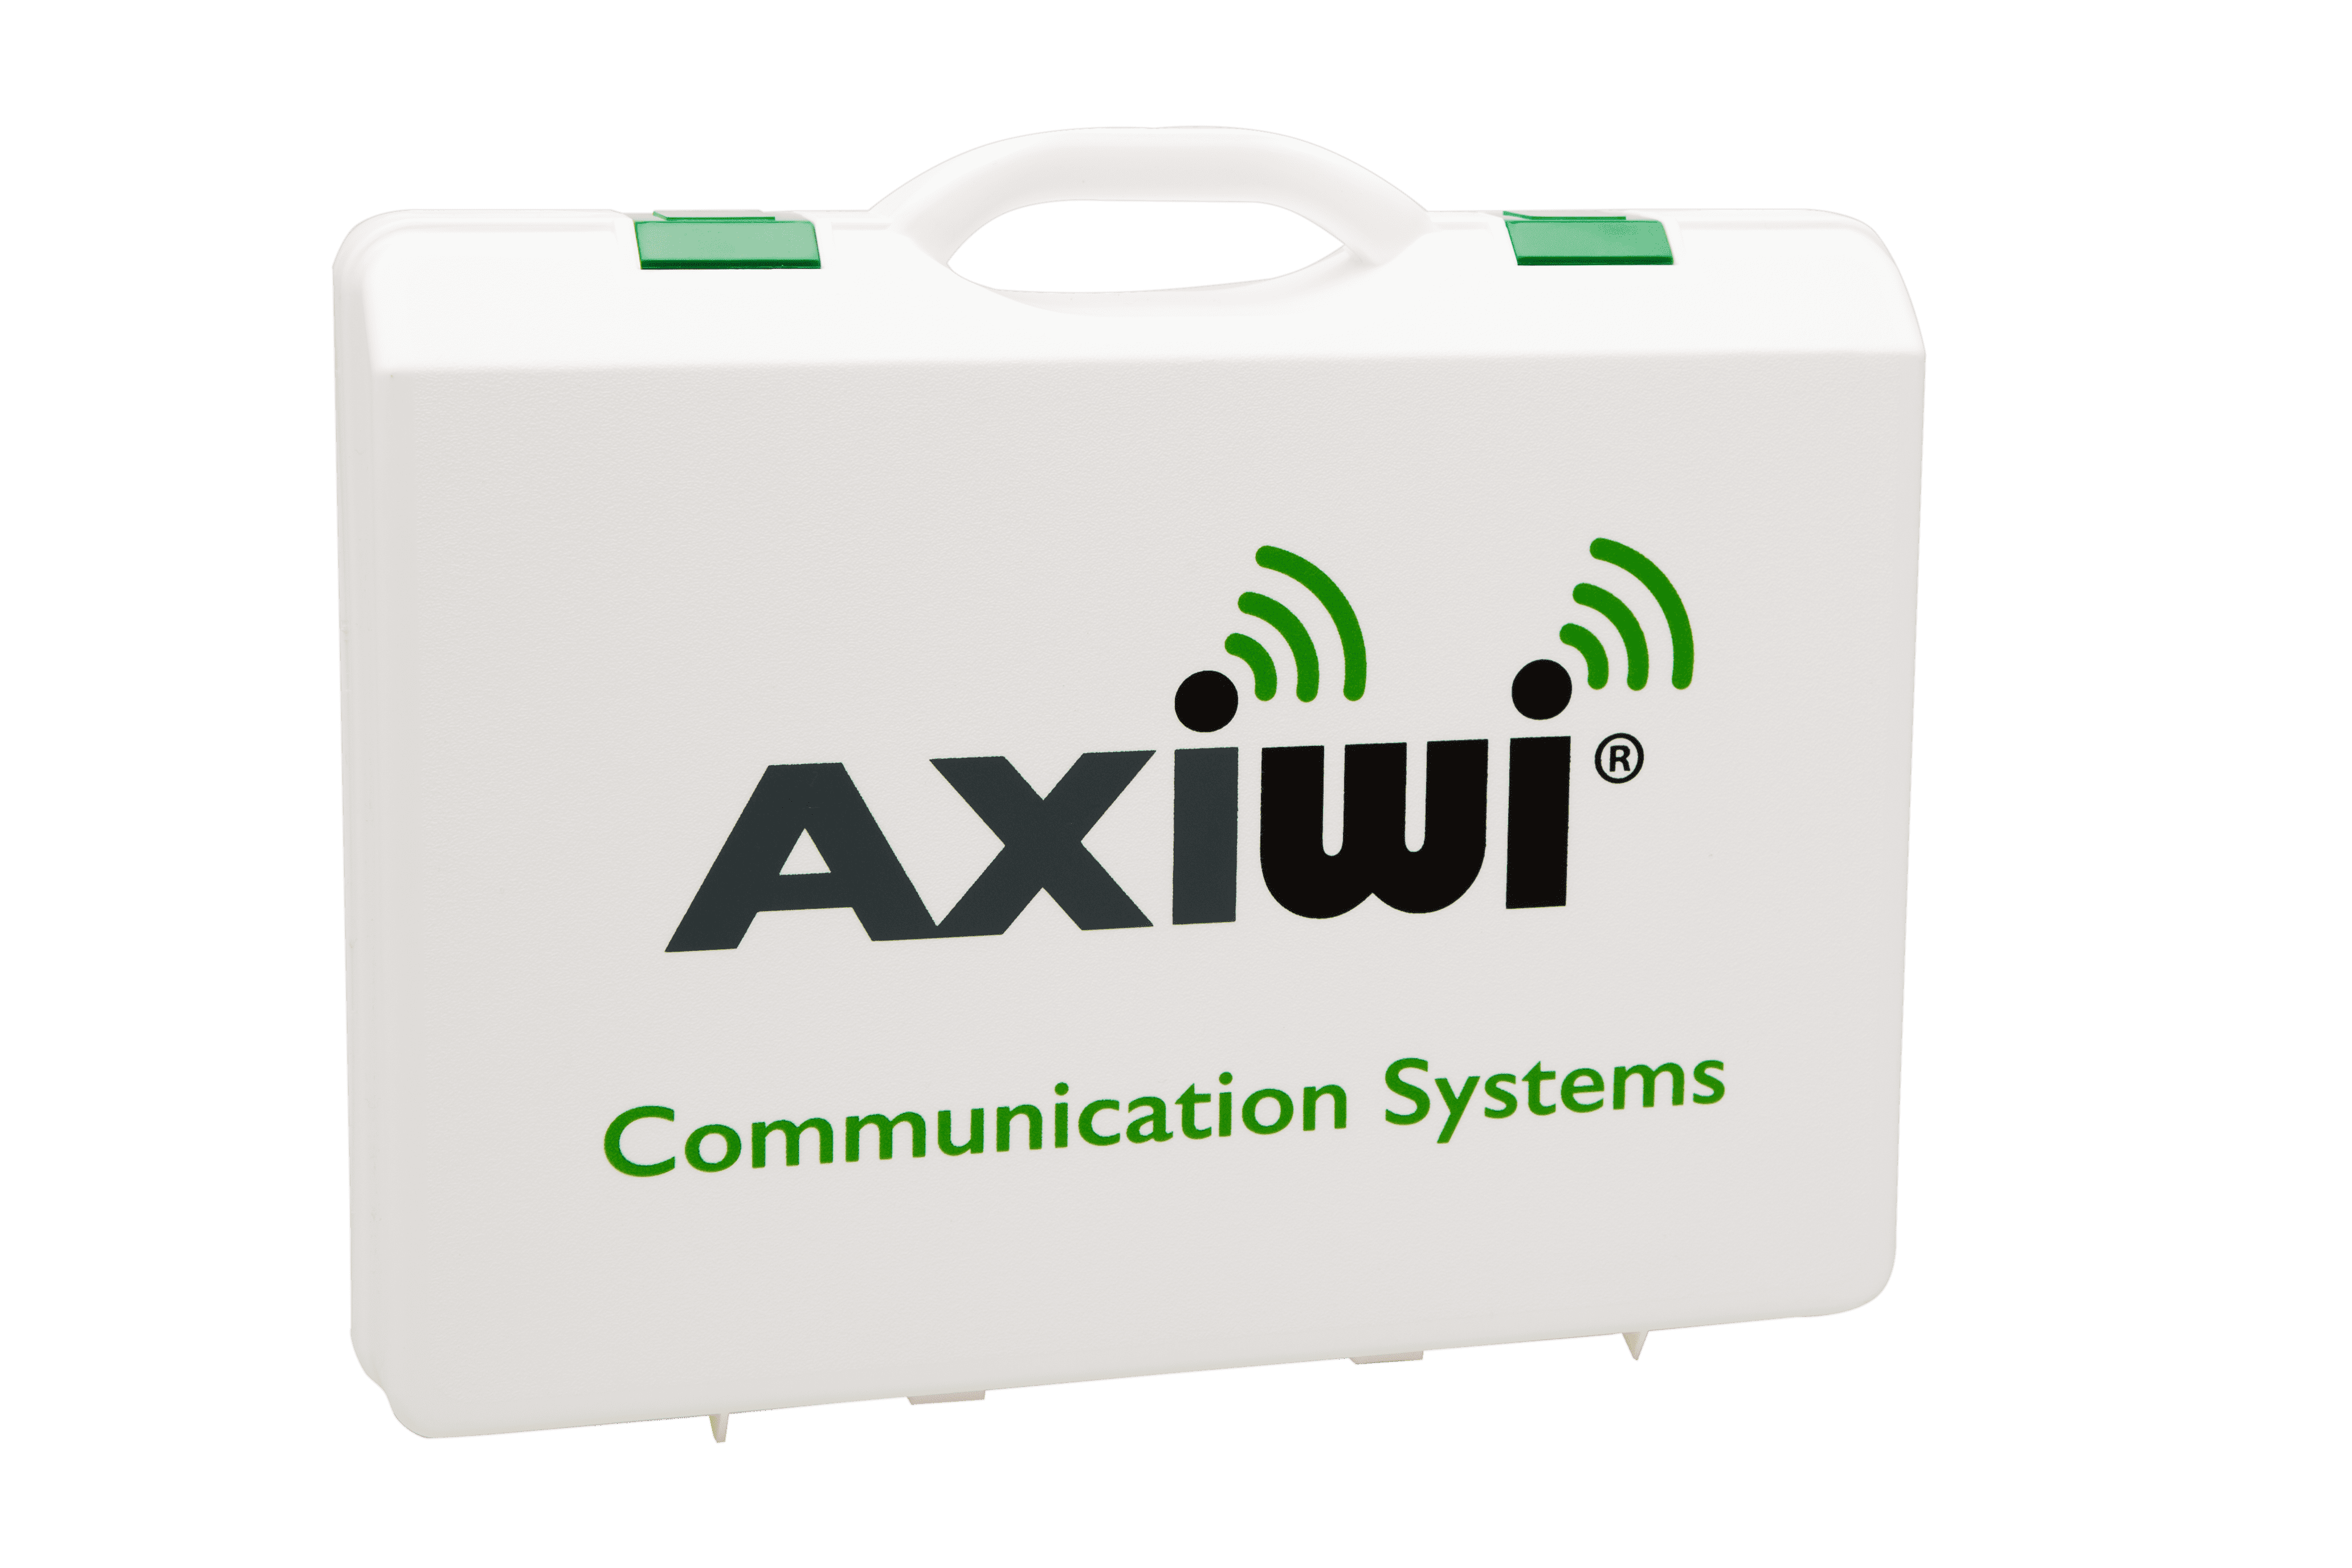 axitour-axiwi-case-tr-003-comfort